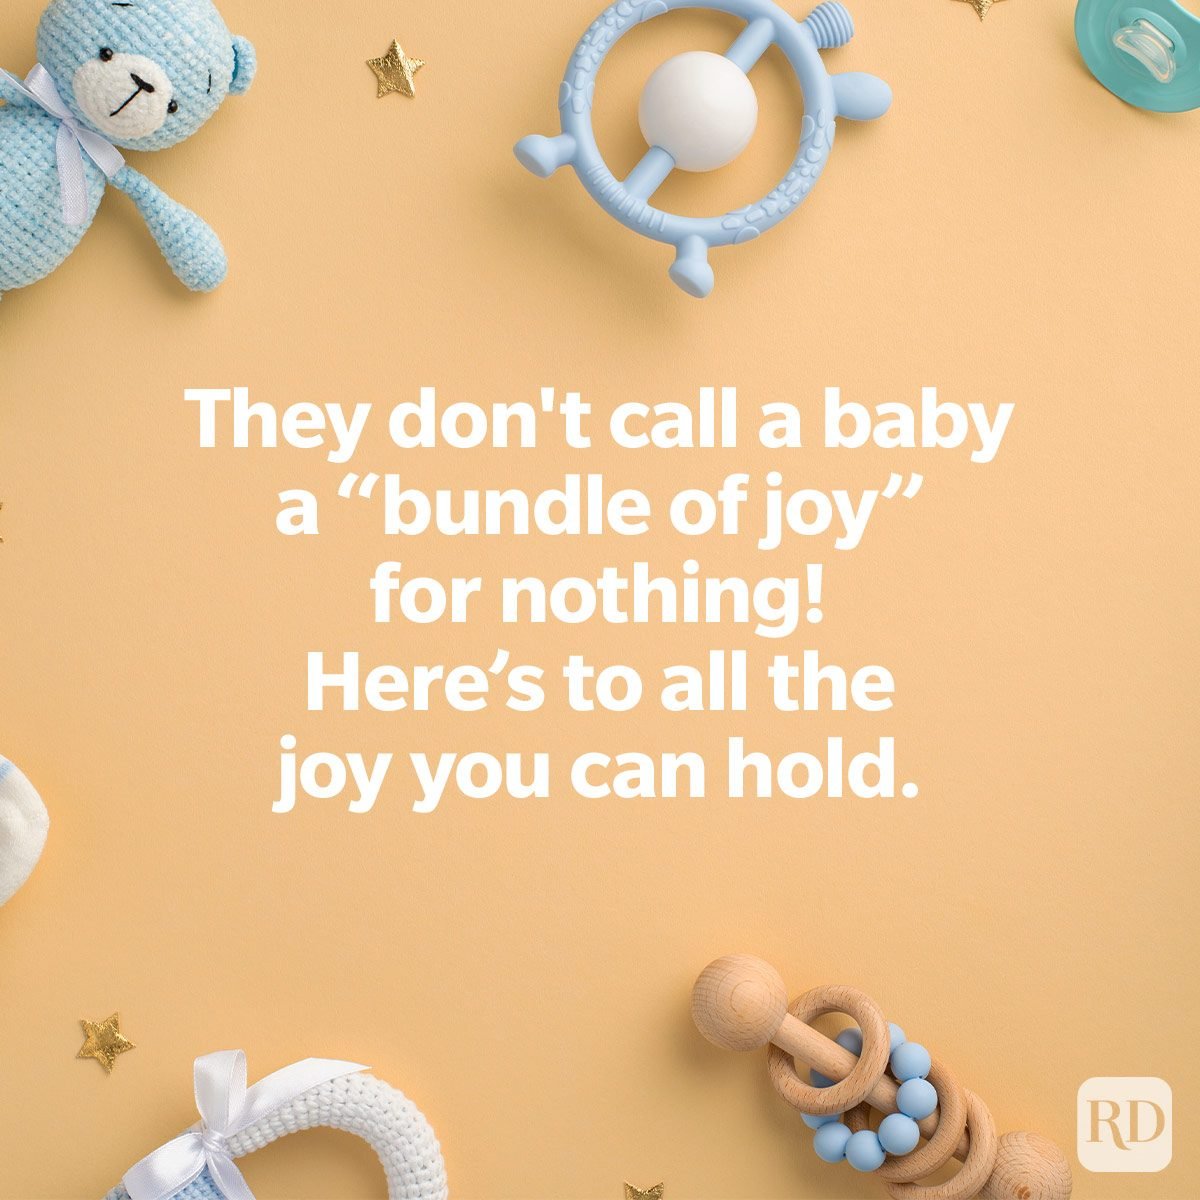 They don't call a baby a "bundle of joy" for nothing! Here's to all the joy you can hold. sweet baby wishes to send to expectant parents on baby toys and items background flat lay They don't call a baby a "bundle of joy" for nothing! Here's to all the joy you can hold.